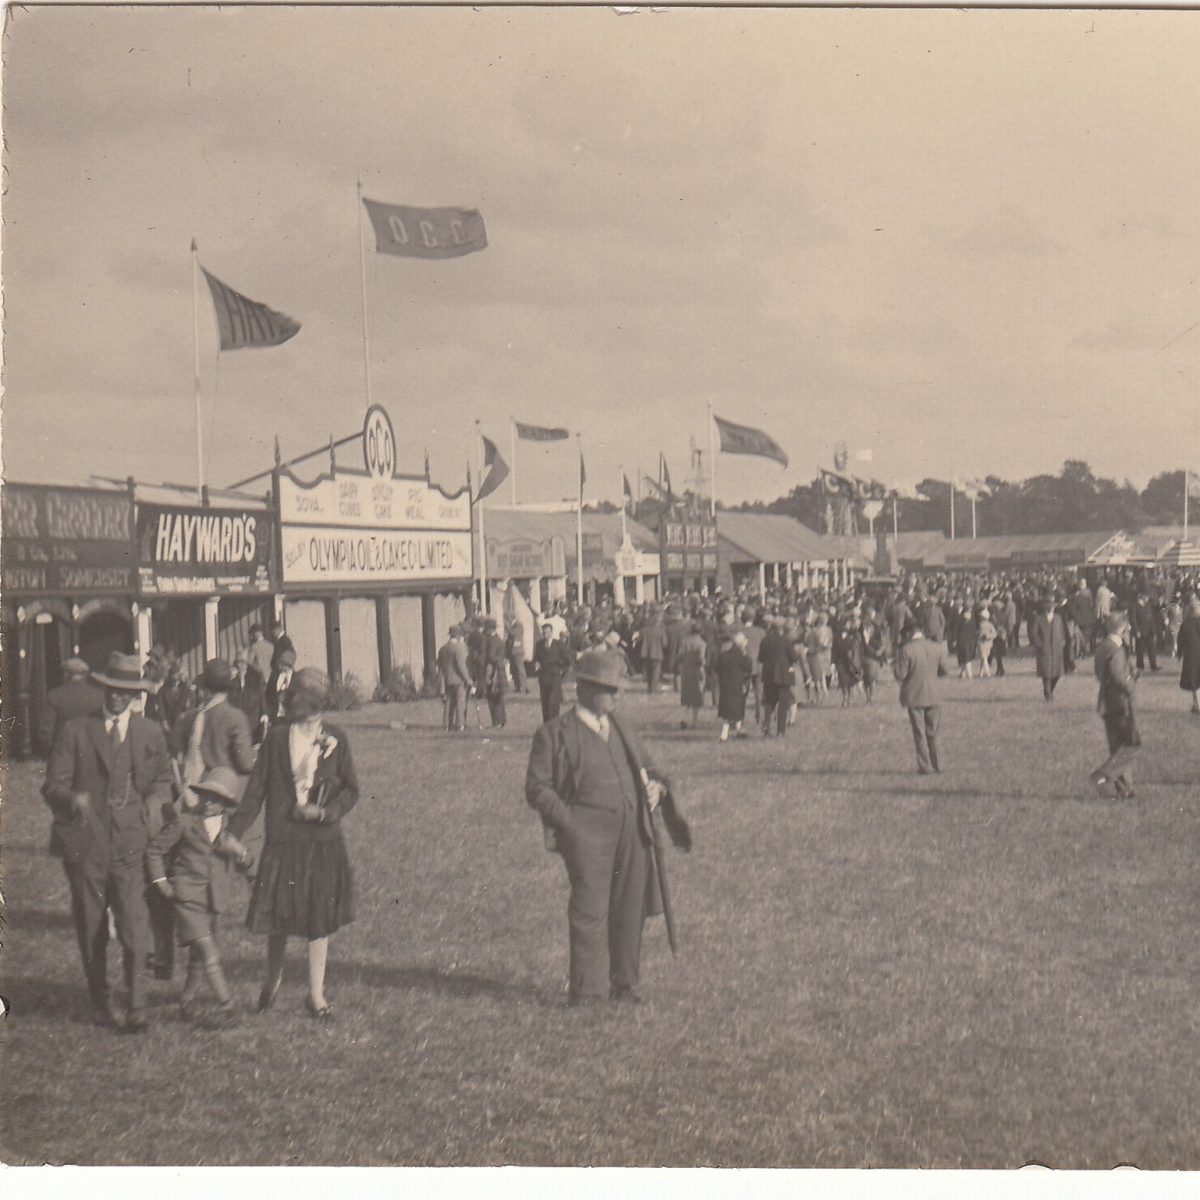 From the Collections &amp; Archives Woodhall Show. Why not pop